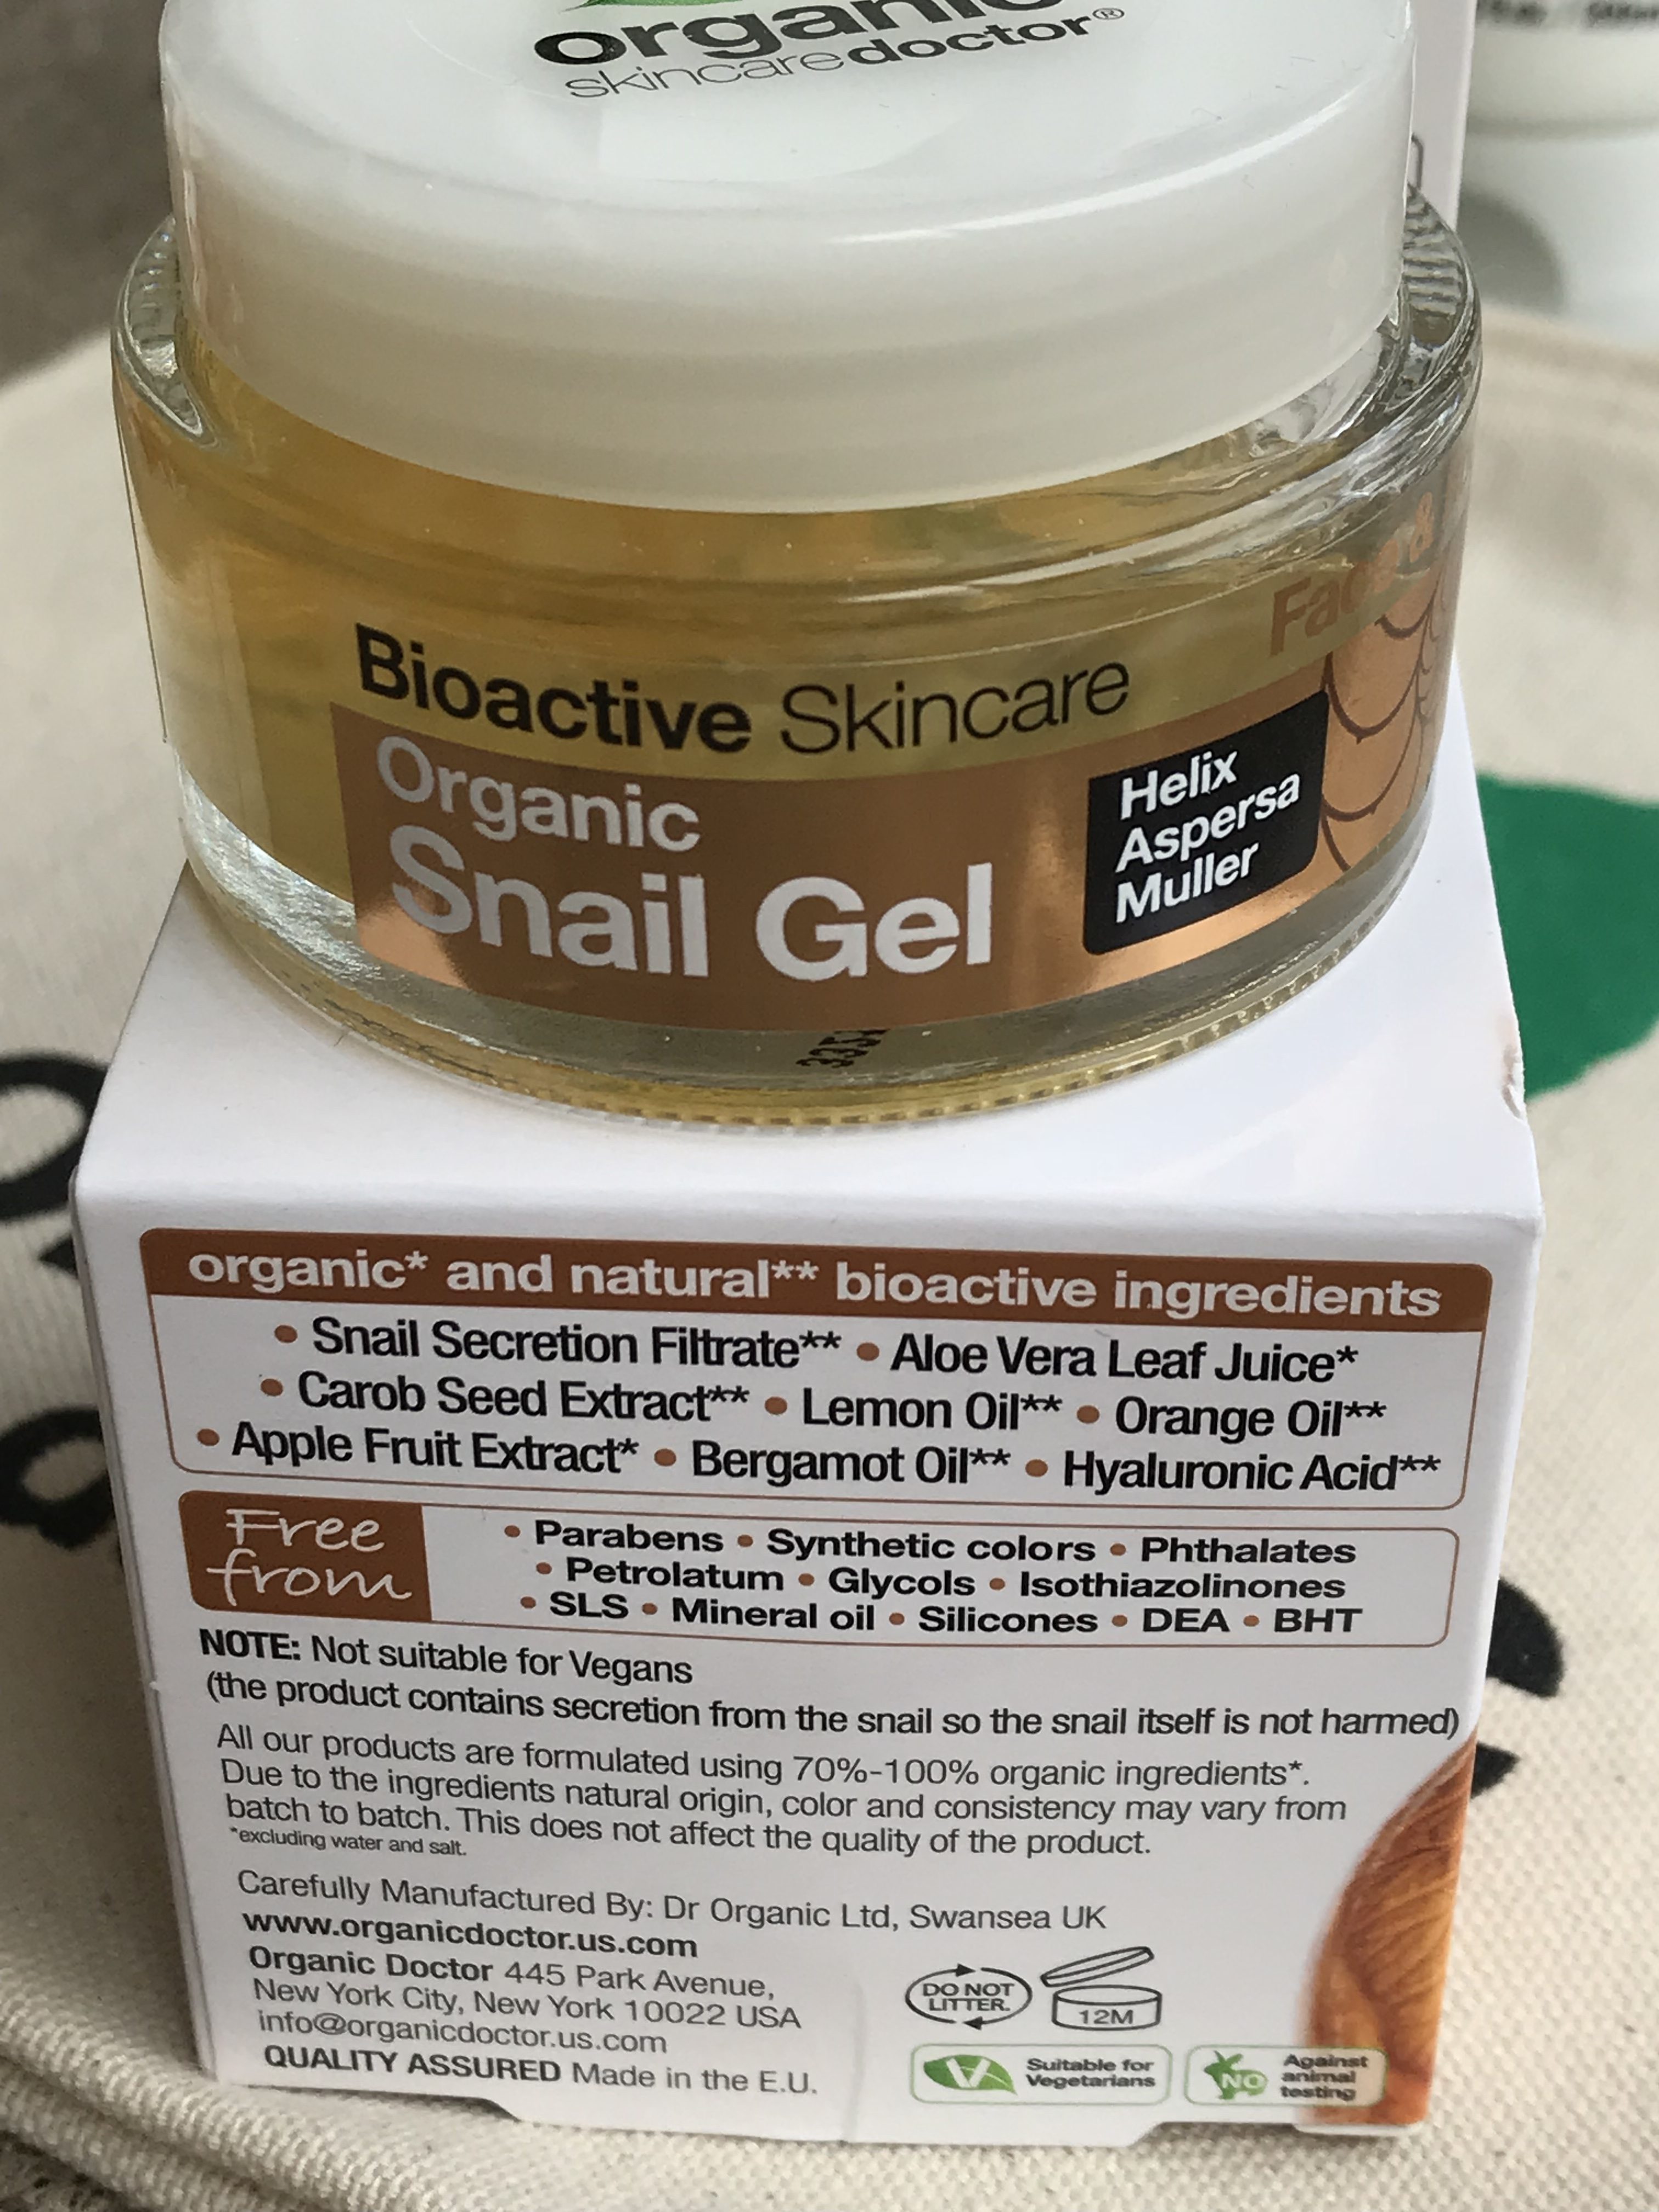 Want to take your skincare to the next level. These products from Organic Doctor will leave your skin looking beautiful, hydrated and refreshed